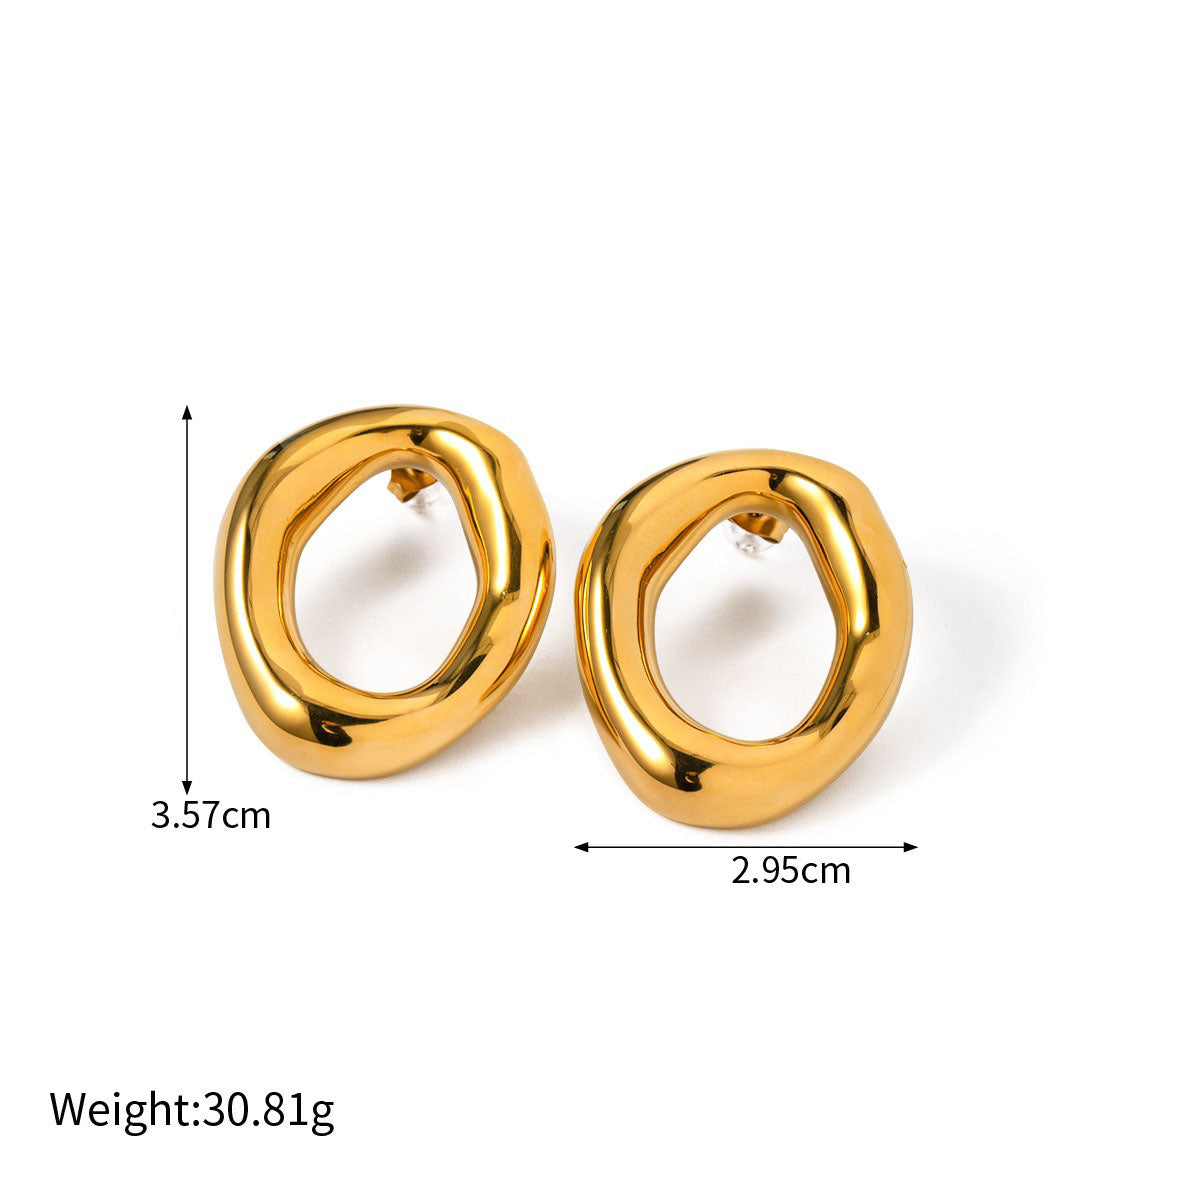 Gold simple and elegant oval hollow design versatile earrings